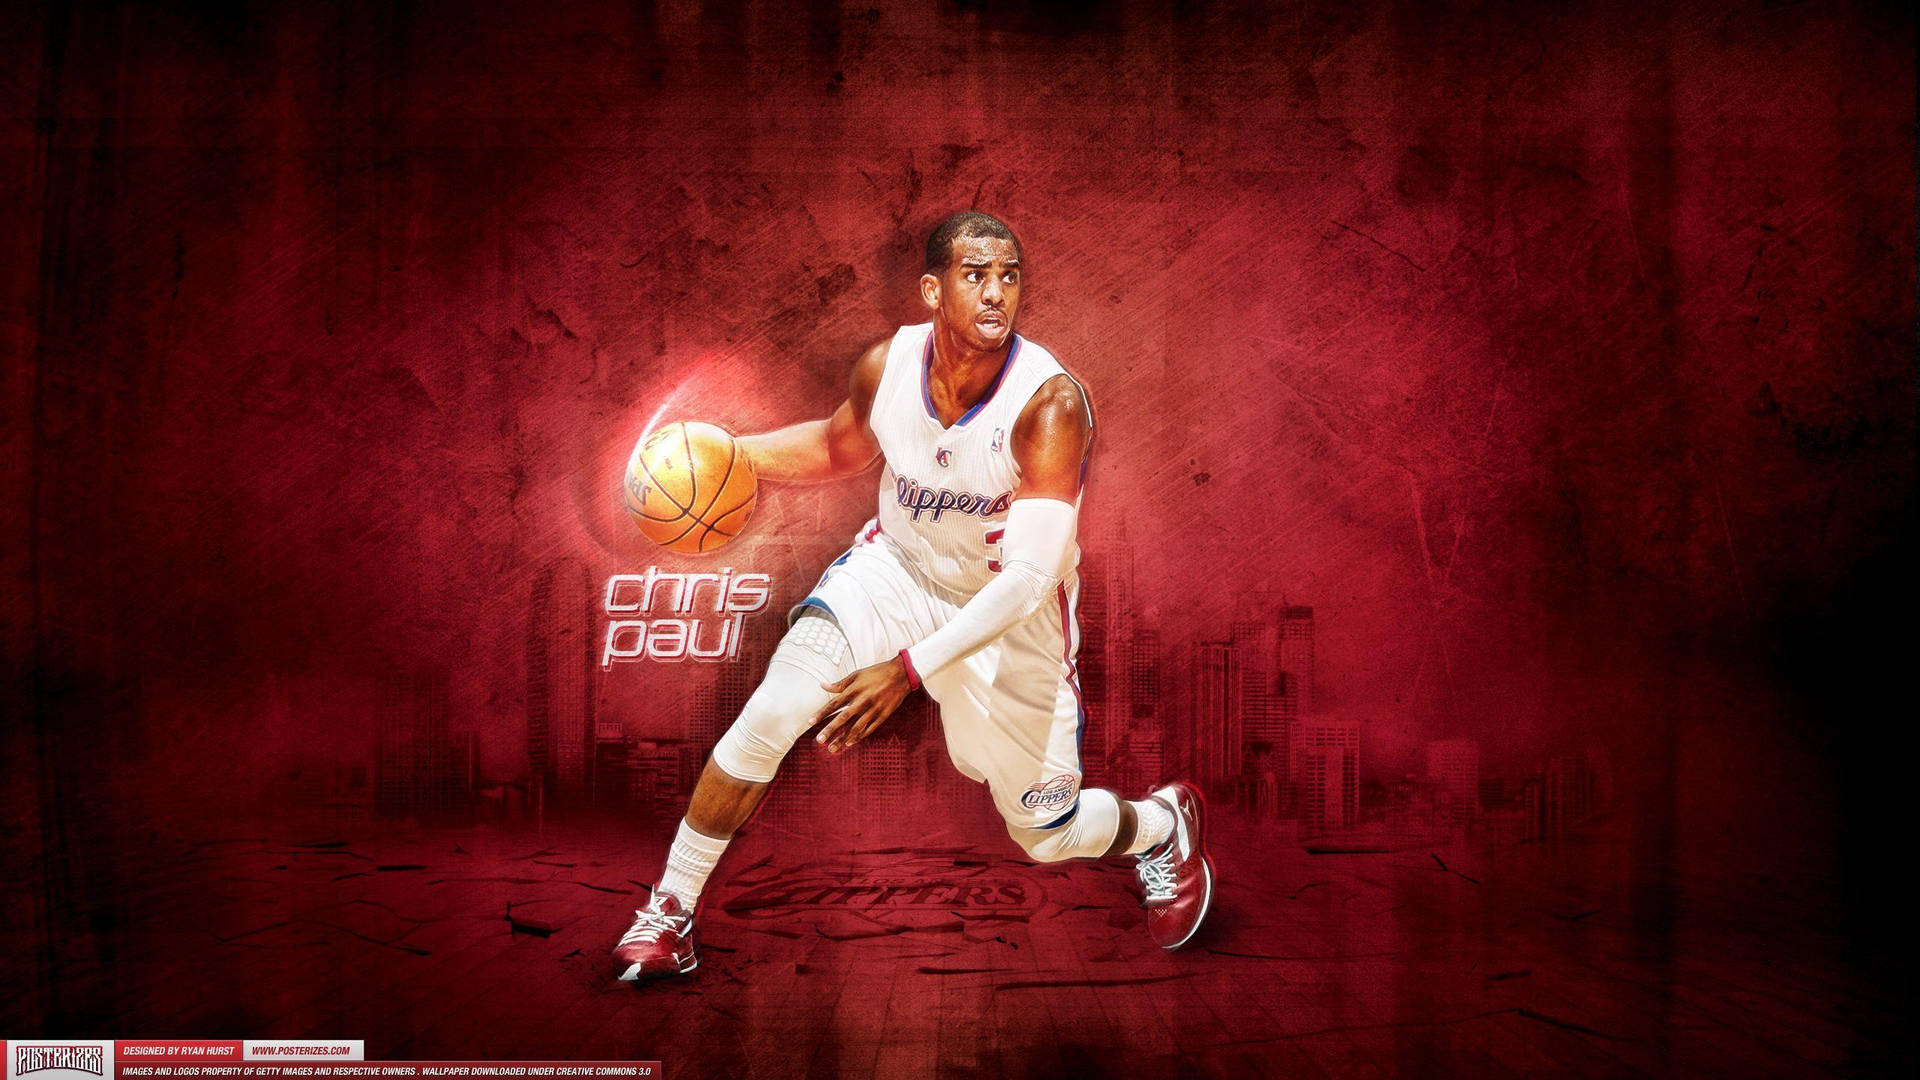 Chris Paul In Action On The Court Wallpaper